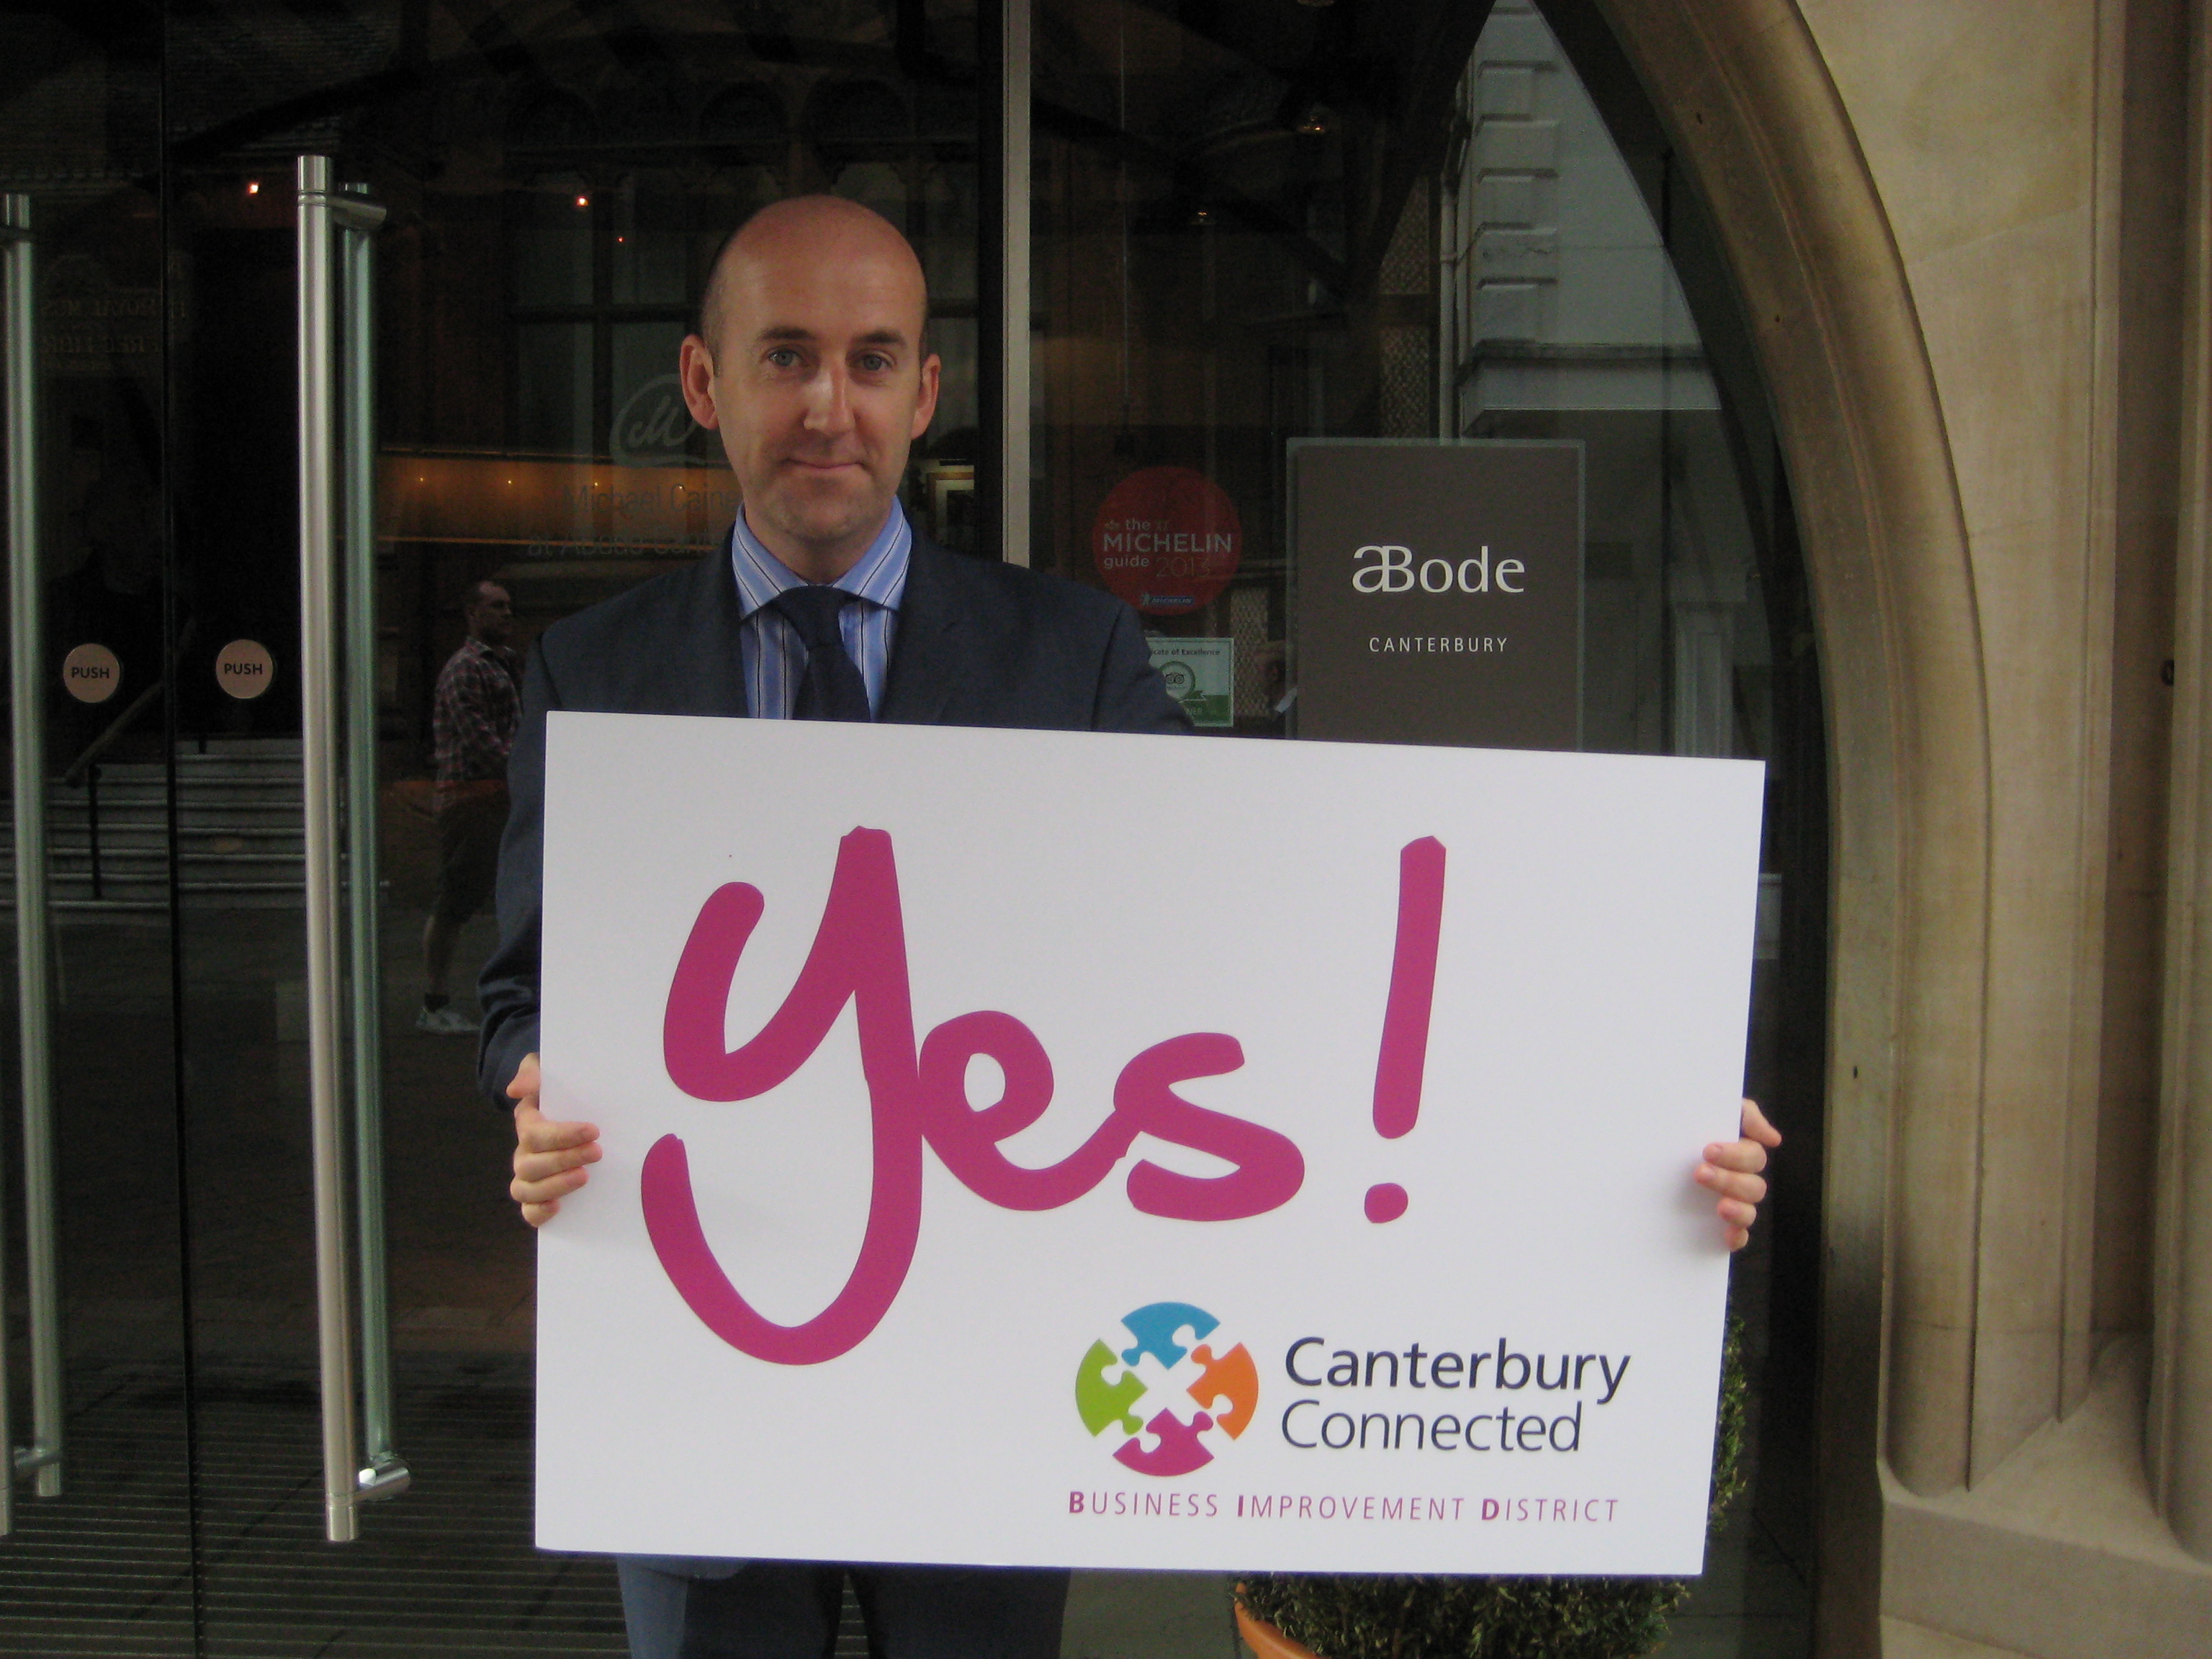 A man outside aBode holding a sign that says Yes! Canterbury Connected BID